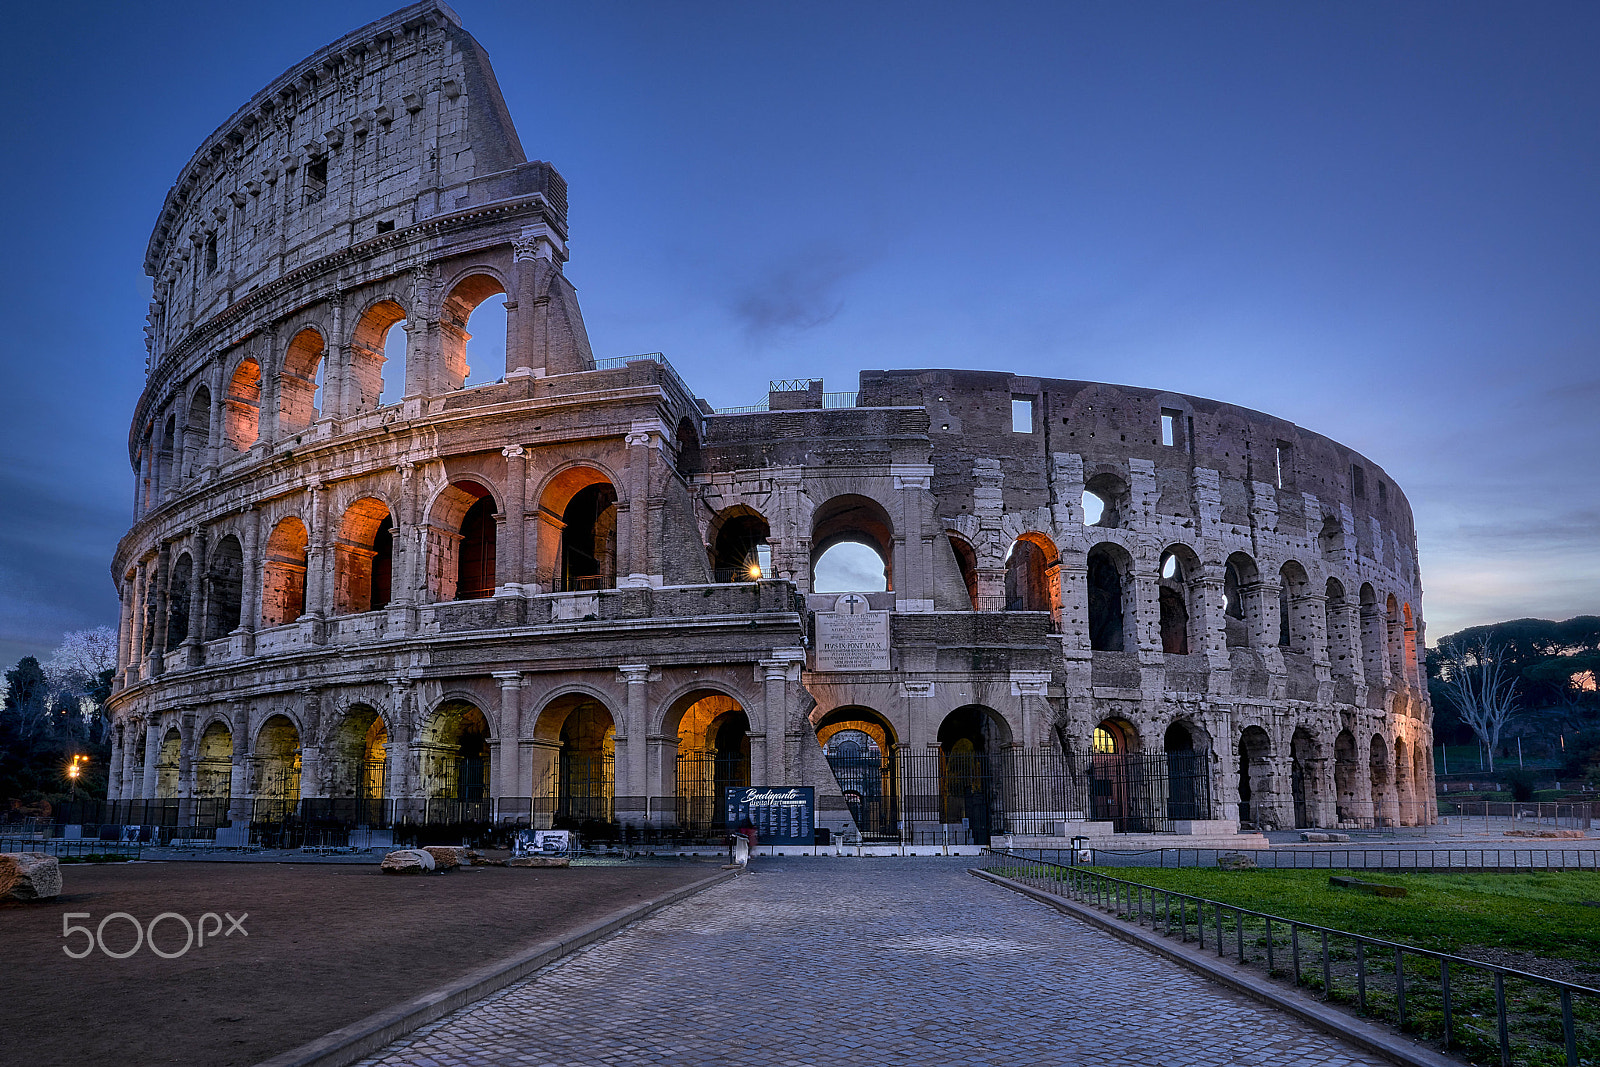 Sony FE 16-35mm F2.8 GM sample photo. The mighty colosseum photography